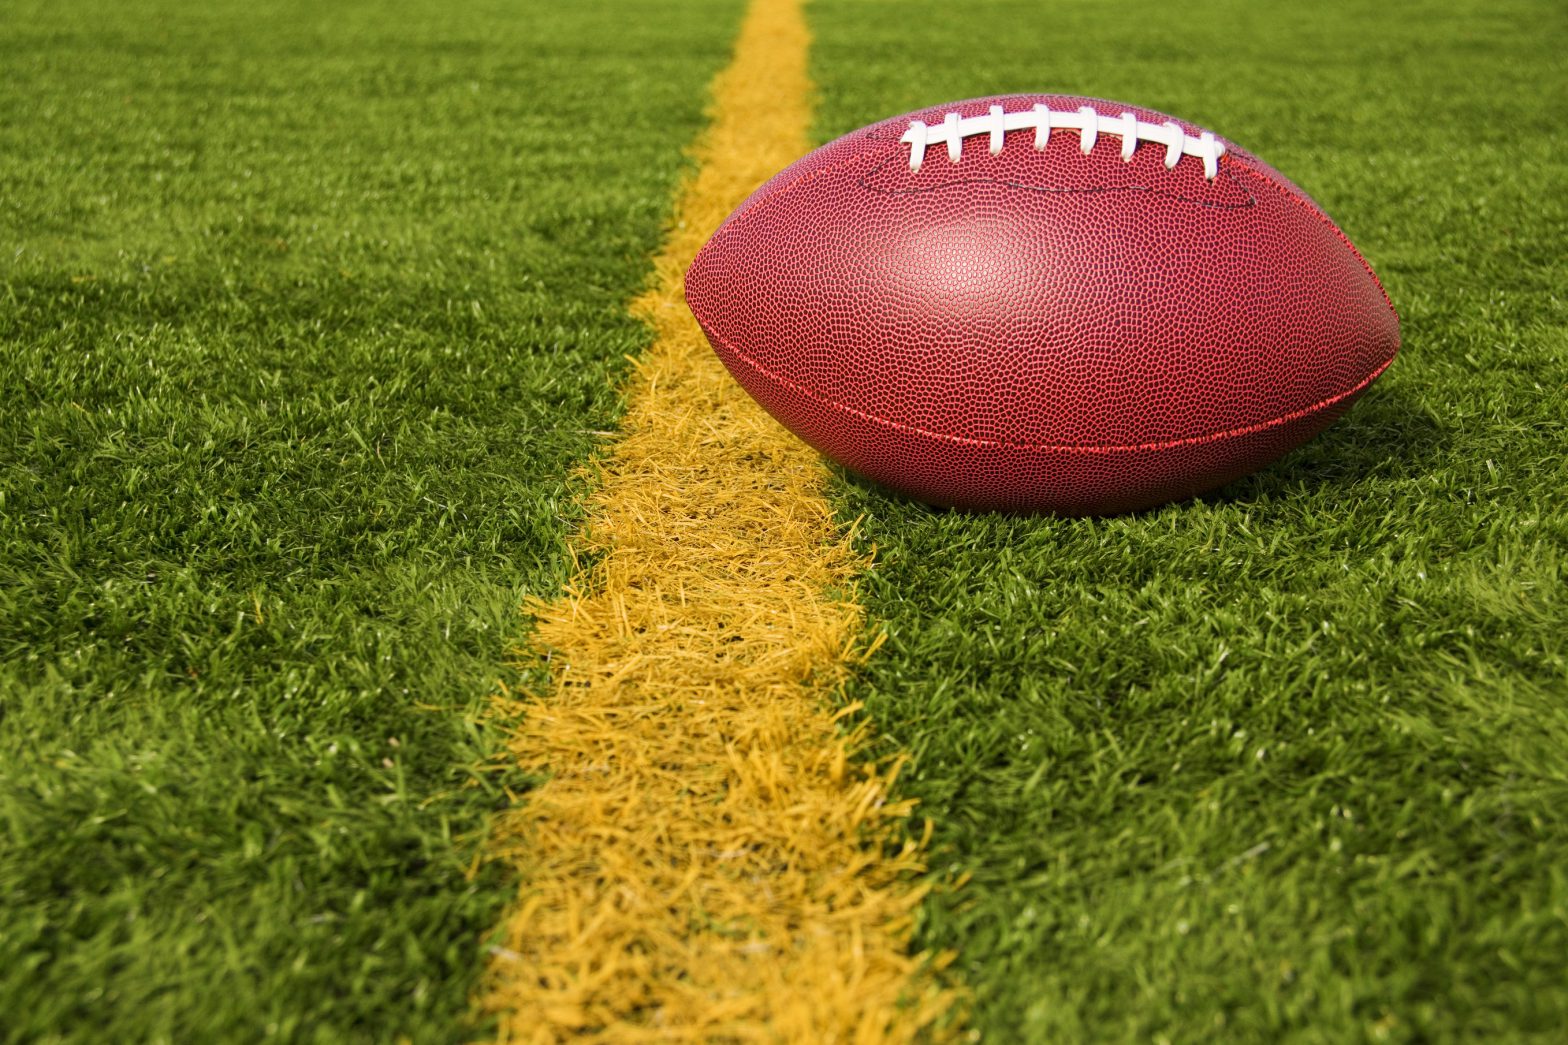 8 Marketing Lessons from the 2015 Super Bowl Commercials